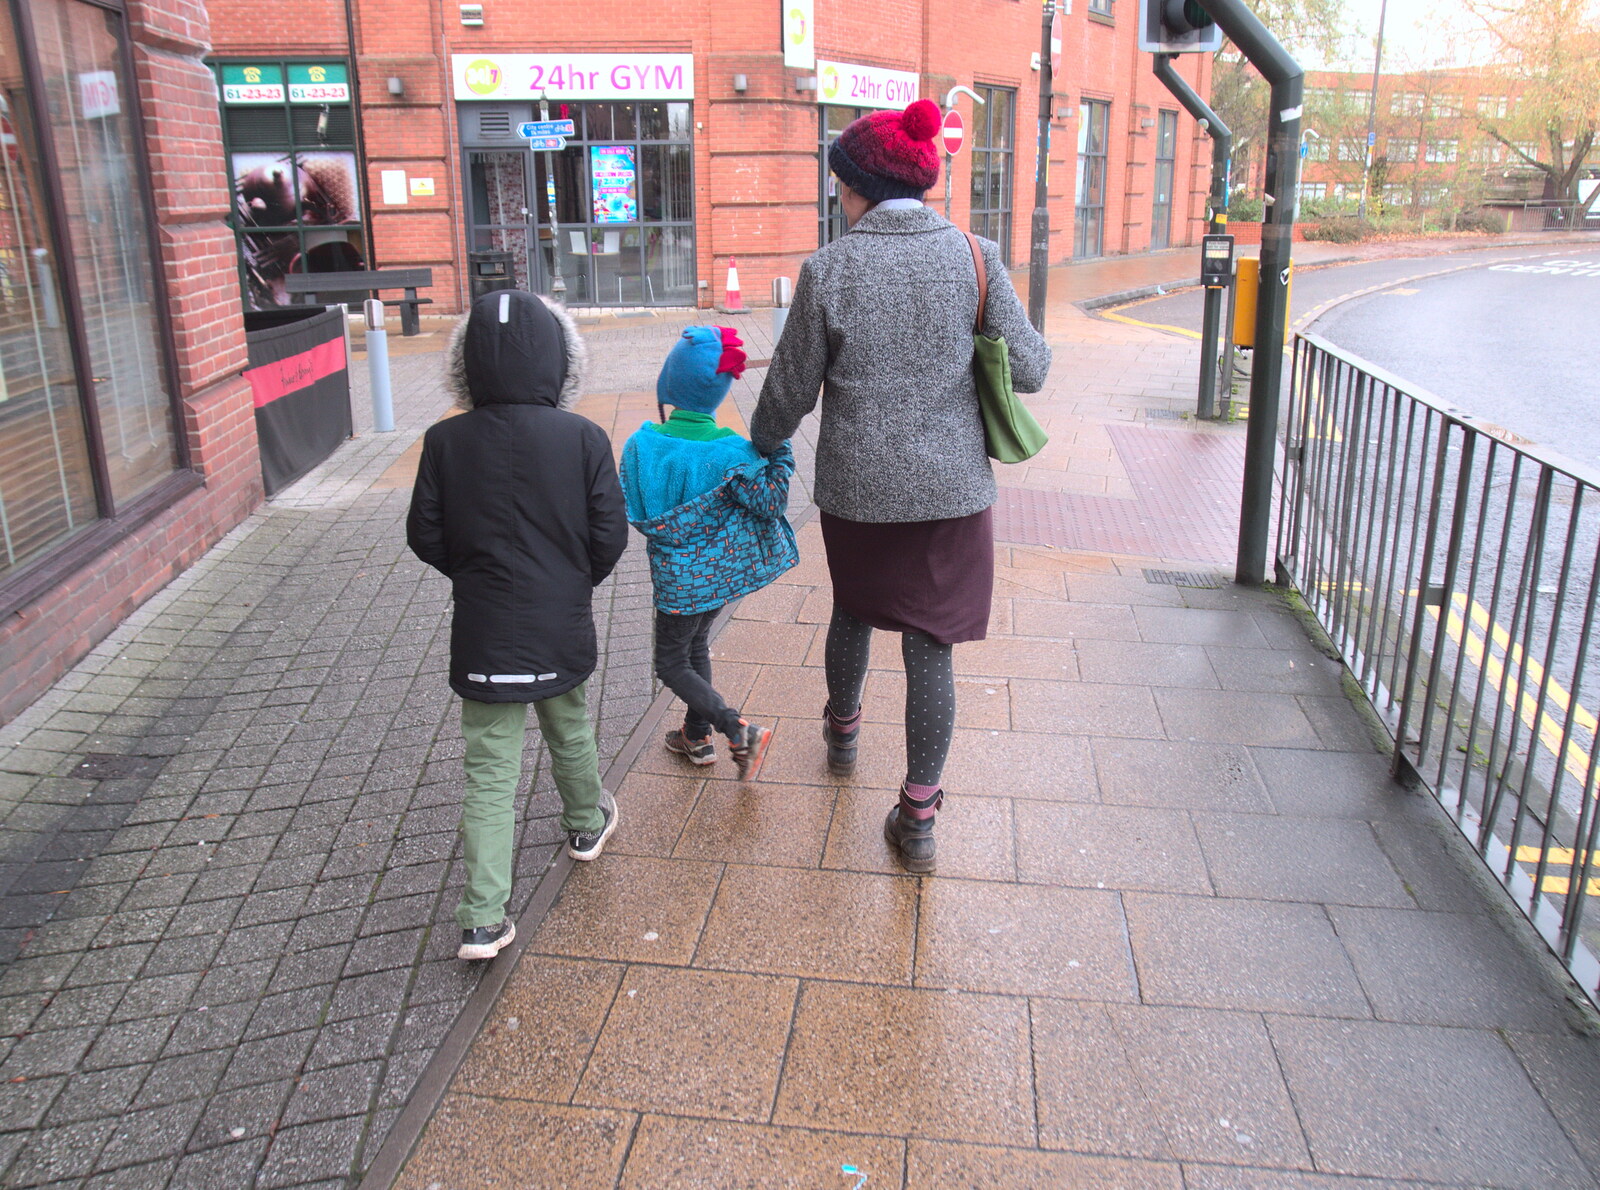 Fred, Harry and Isobel head into Riverside from A Trip to the Cinema, Norwich, Norfolk - 3rd December 2017